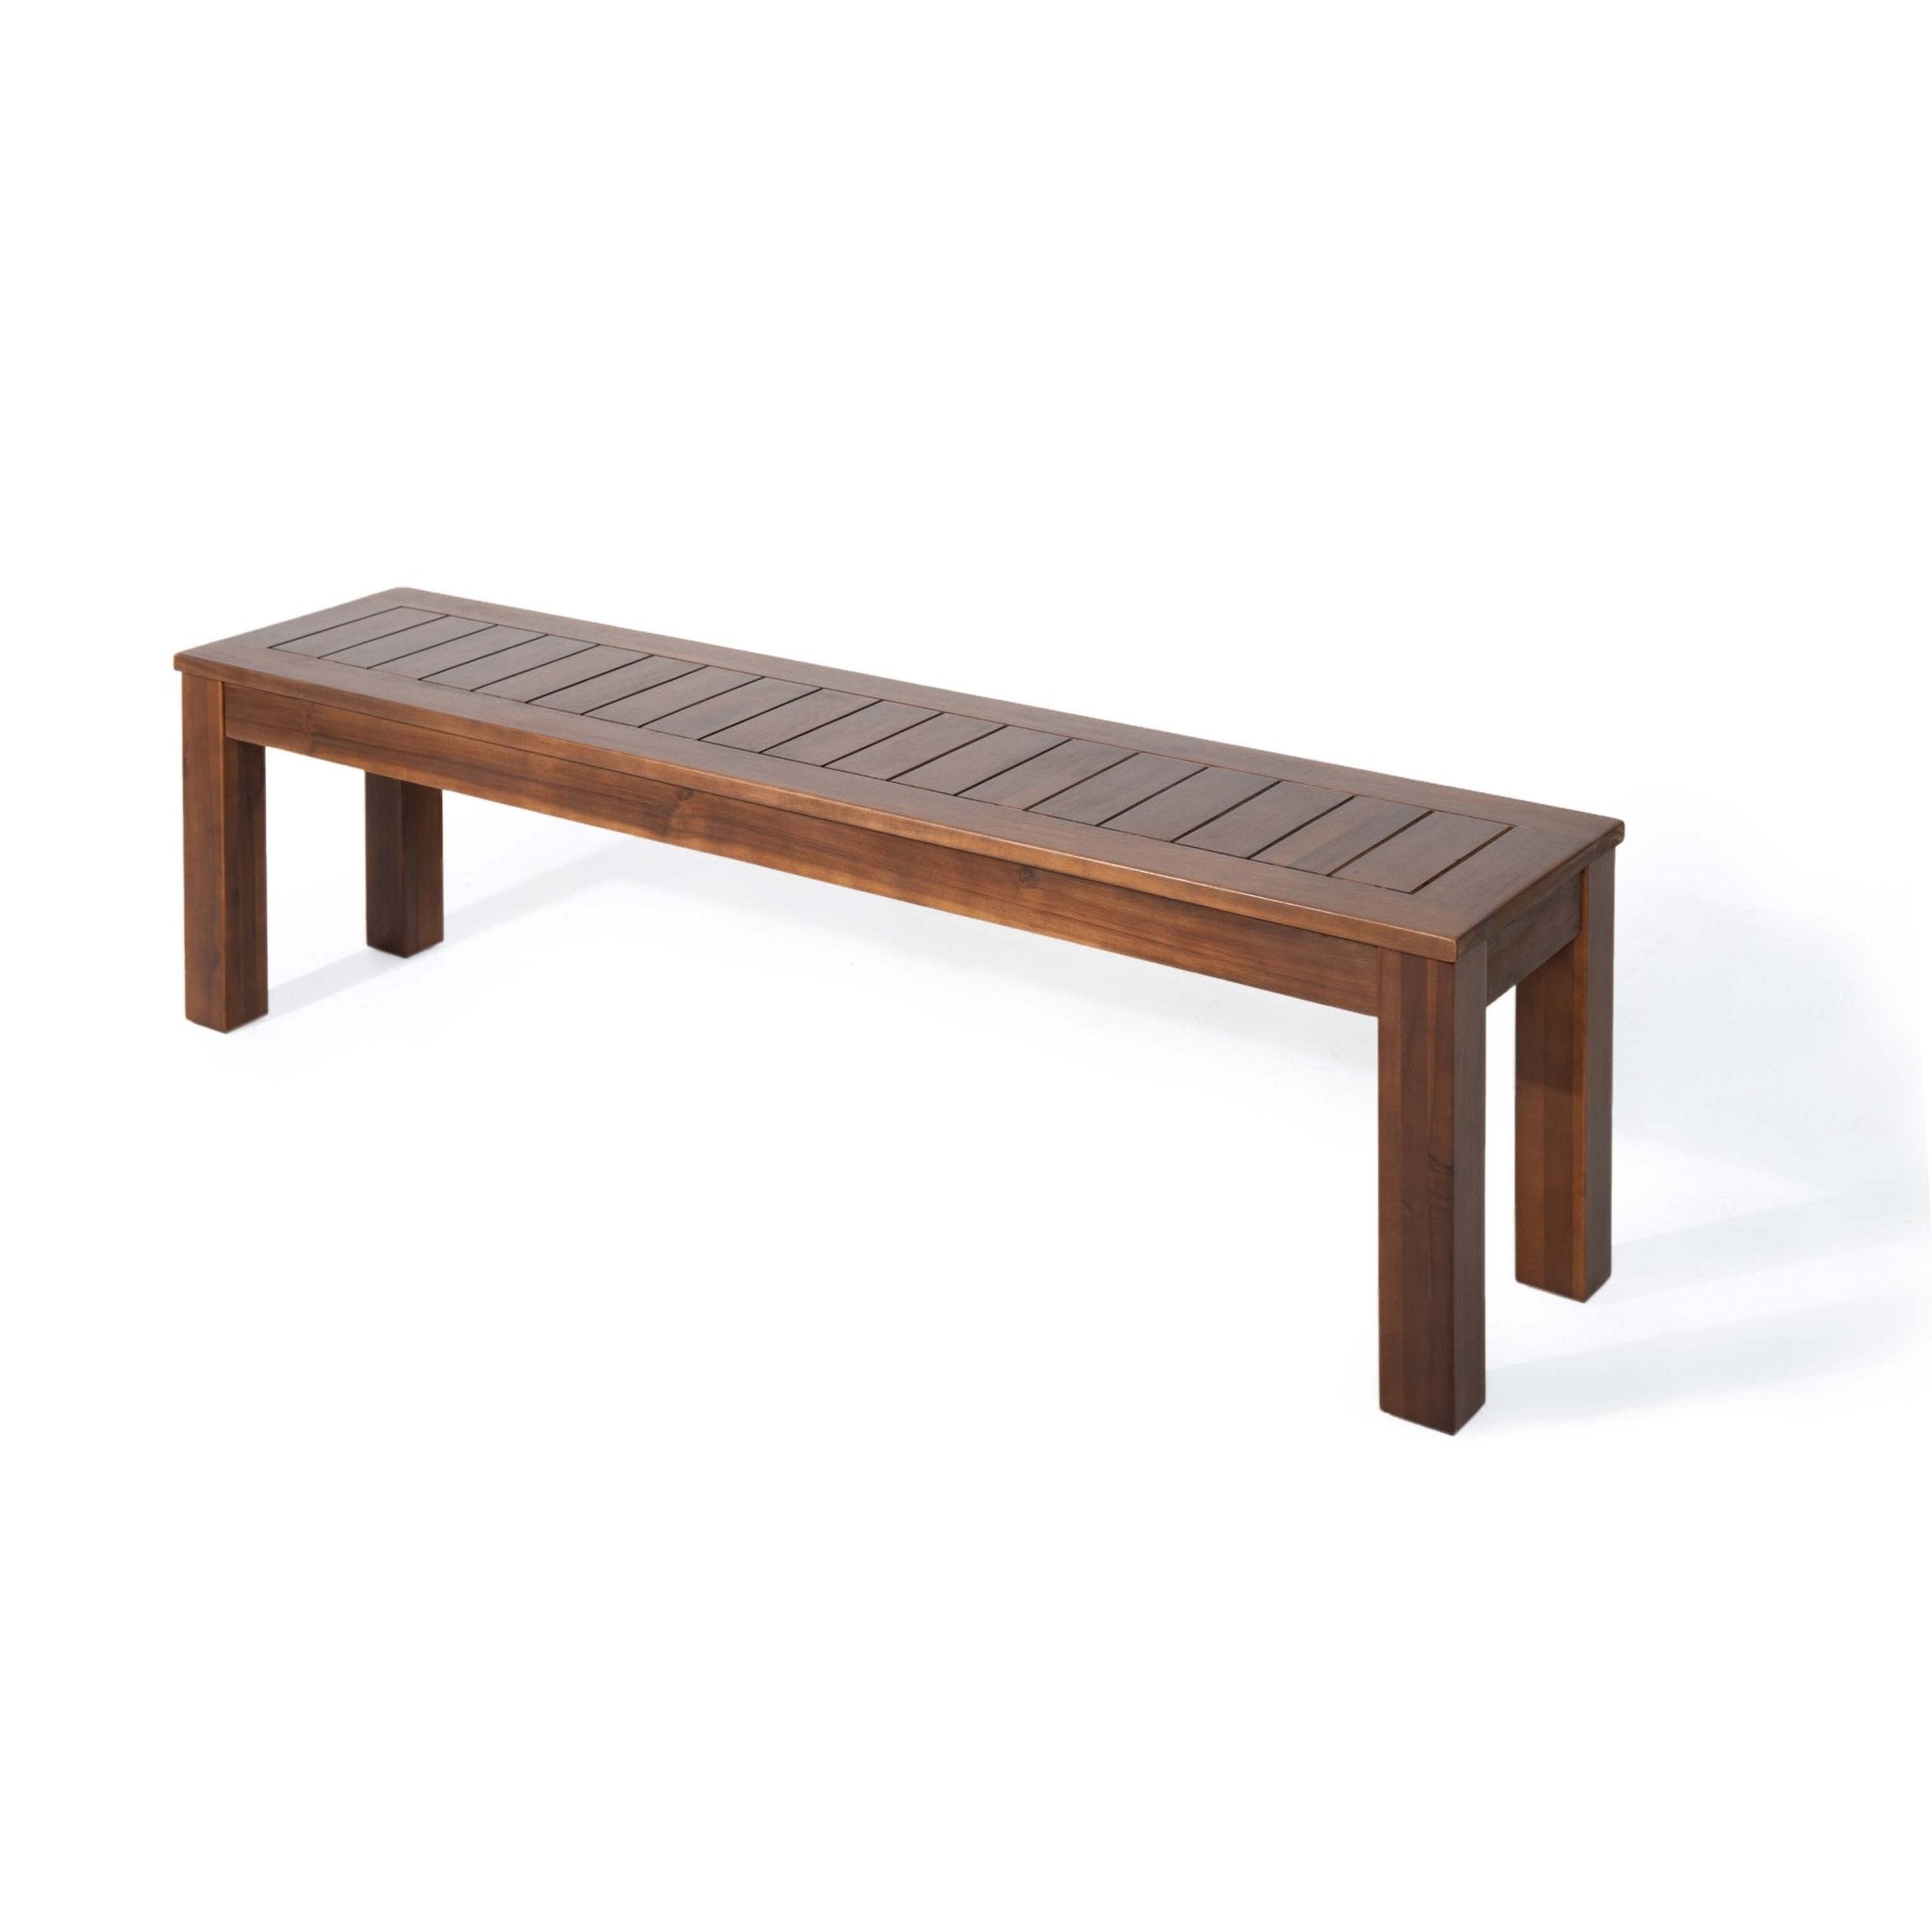 Acacia-Wood-Bench-with-Beautiful-Slat-Paneling-Outdoor-Seating